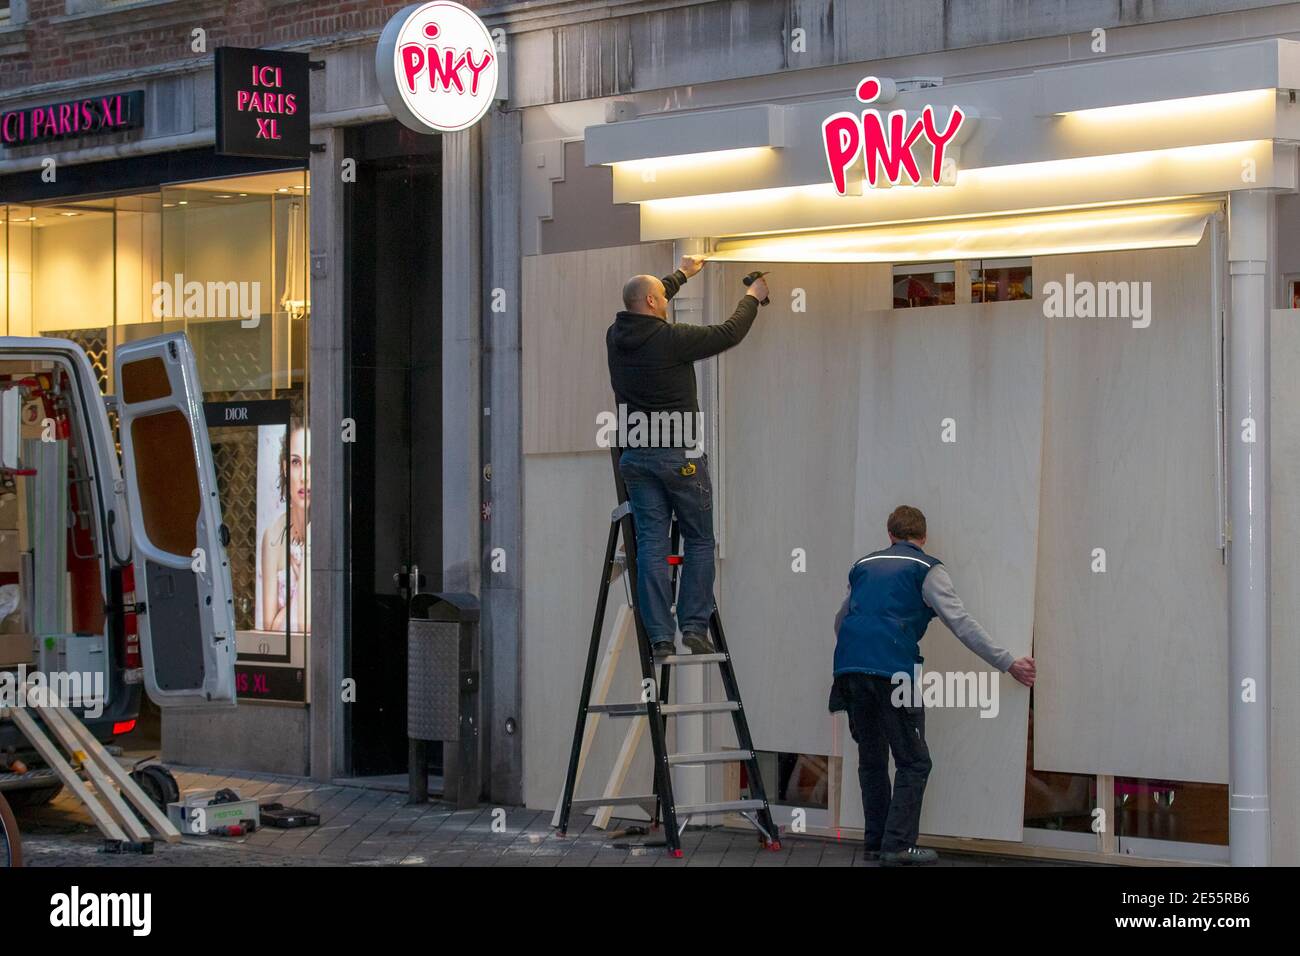 MAASTRICHT, NETHERLANDS, JANUARY 26: Shop owners are seen barricading the windows of their businesses on January 26, 2021 in Maastricht, Netherlands to avoid possible looting as authorities are on the alert for riots for the third night in a row after the Dutch government has put a curfew in effect to stop the further spread of the coronavirus. (Photo by Frank Kerbusch/BSR Agency/Alamy Live News) Stock Photo